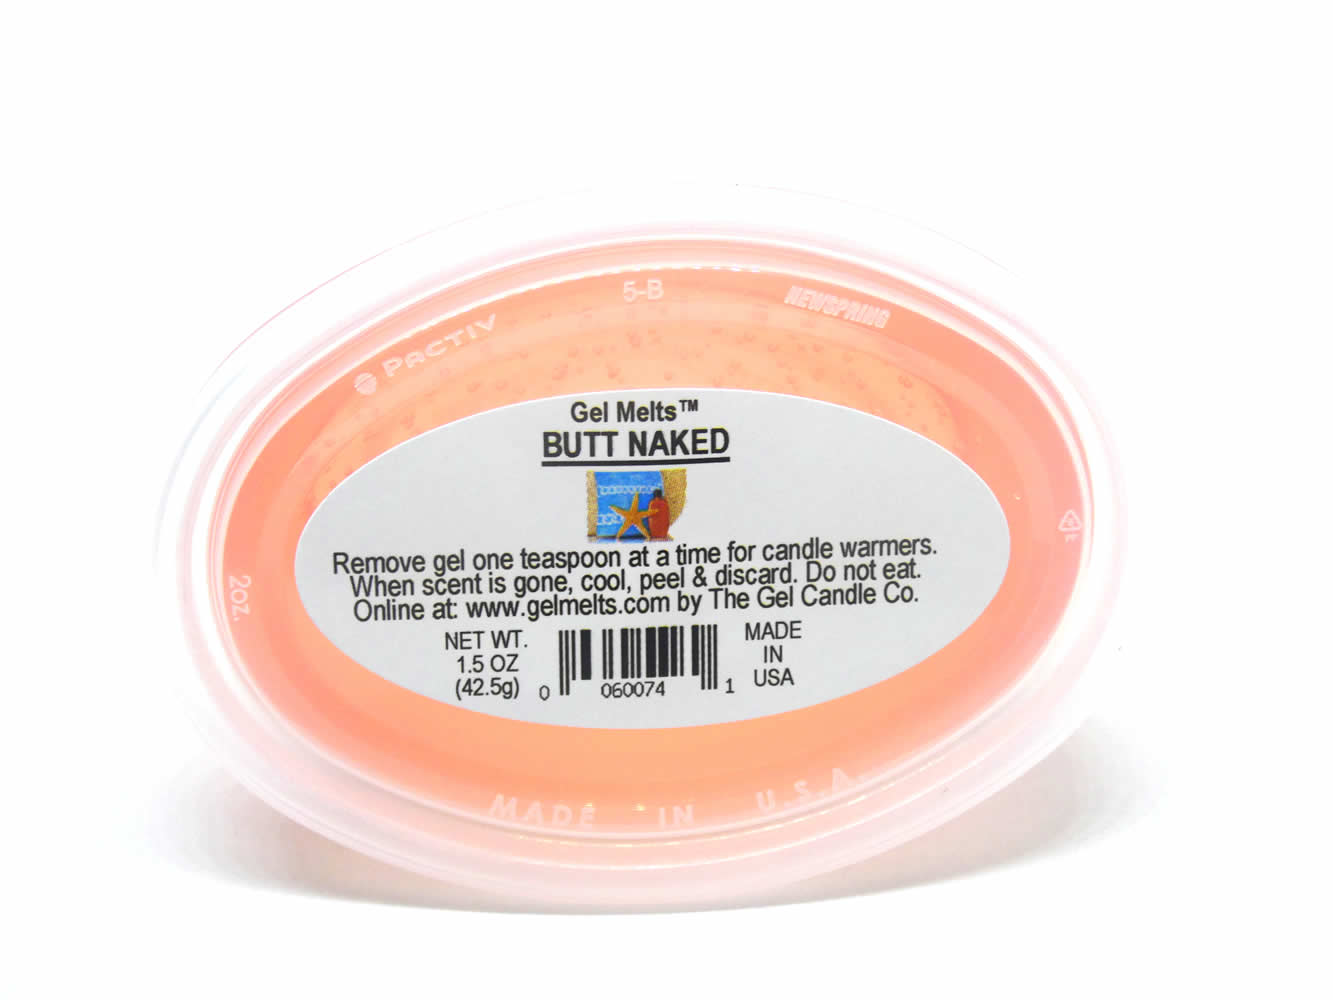 Butt Naked scented Gel Melts™ for warmers - 3 pack